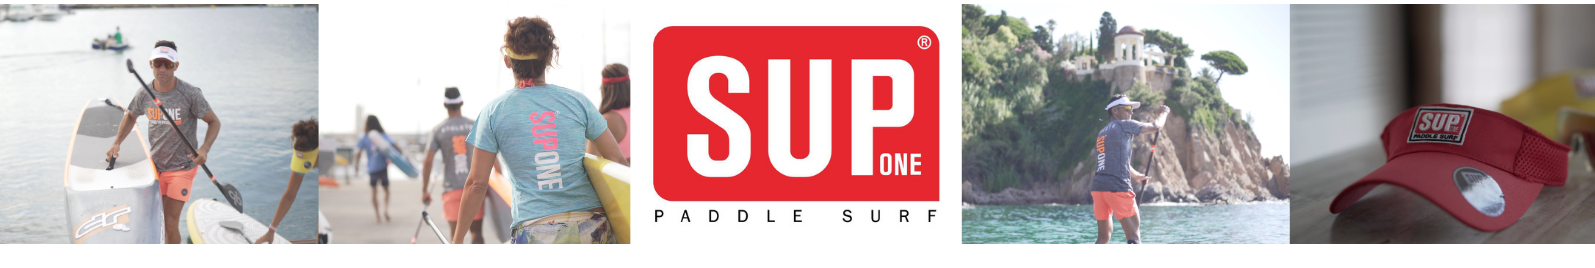 SUP-ONE PADDLE SURF